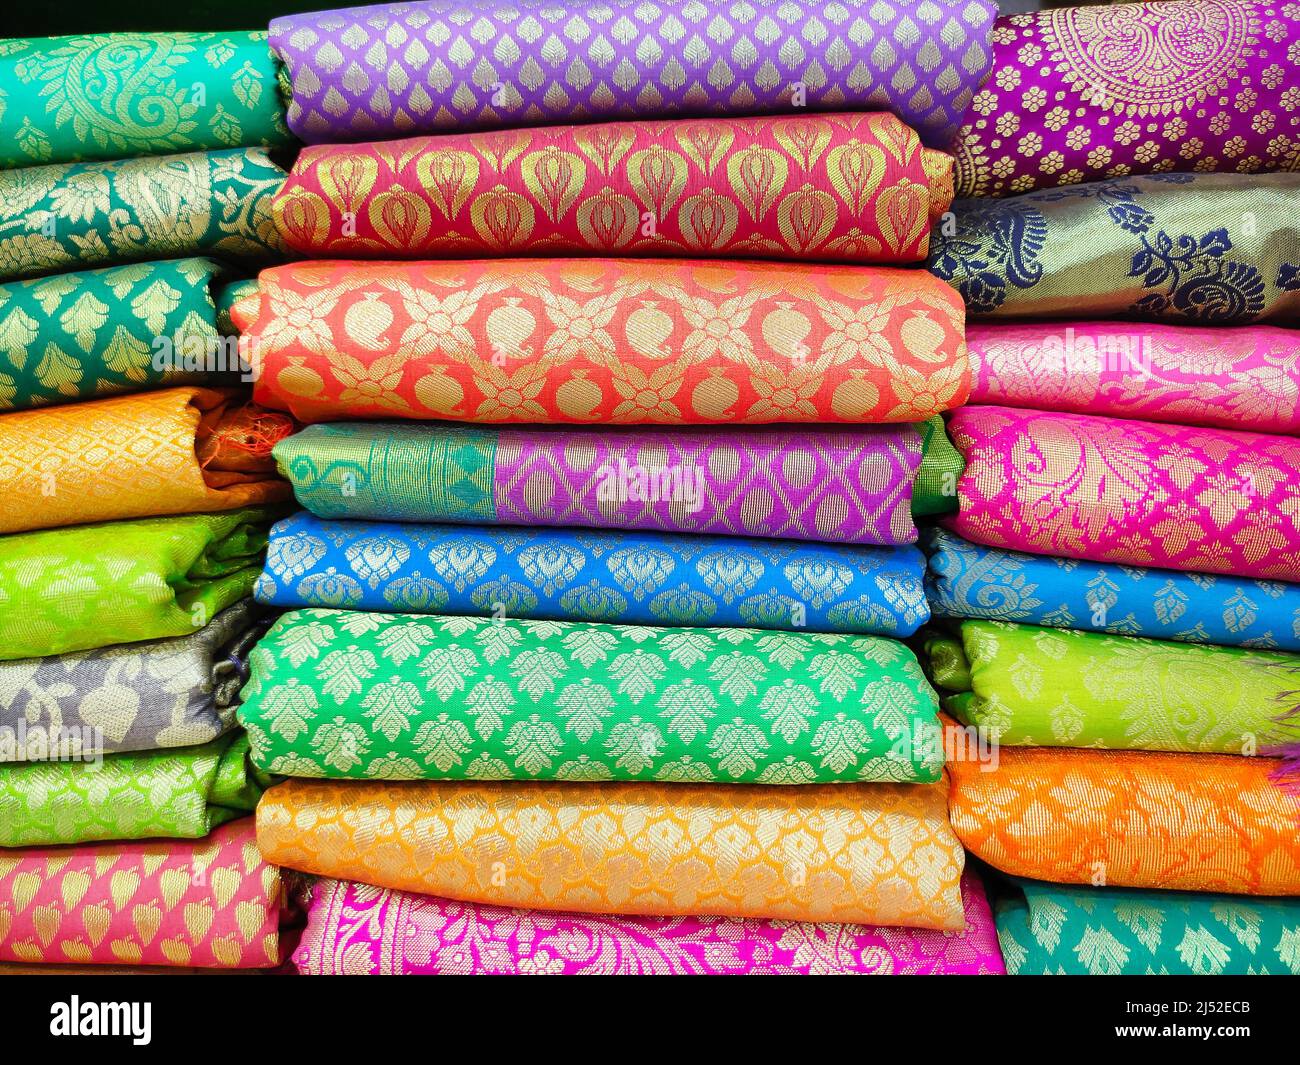 Rolls of fabric and textiles in shop. Multi colors indian patterns on the market Fabrics in rolls. Fabric store in Pune, Maharashtra, India. Stock Photo